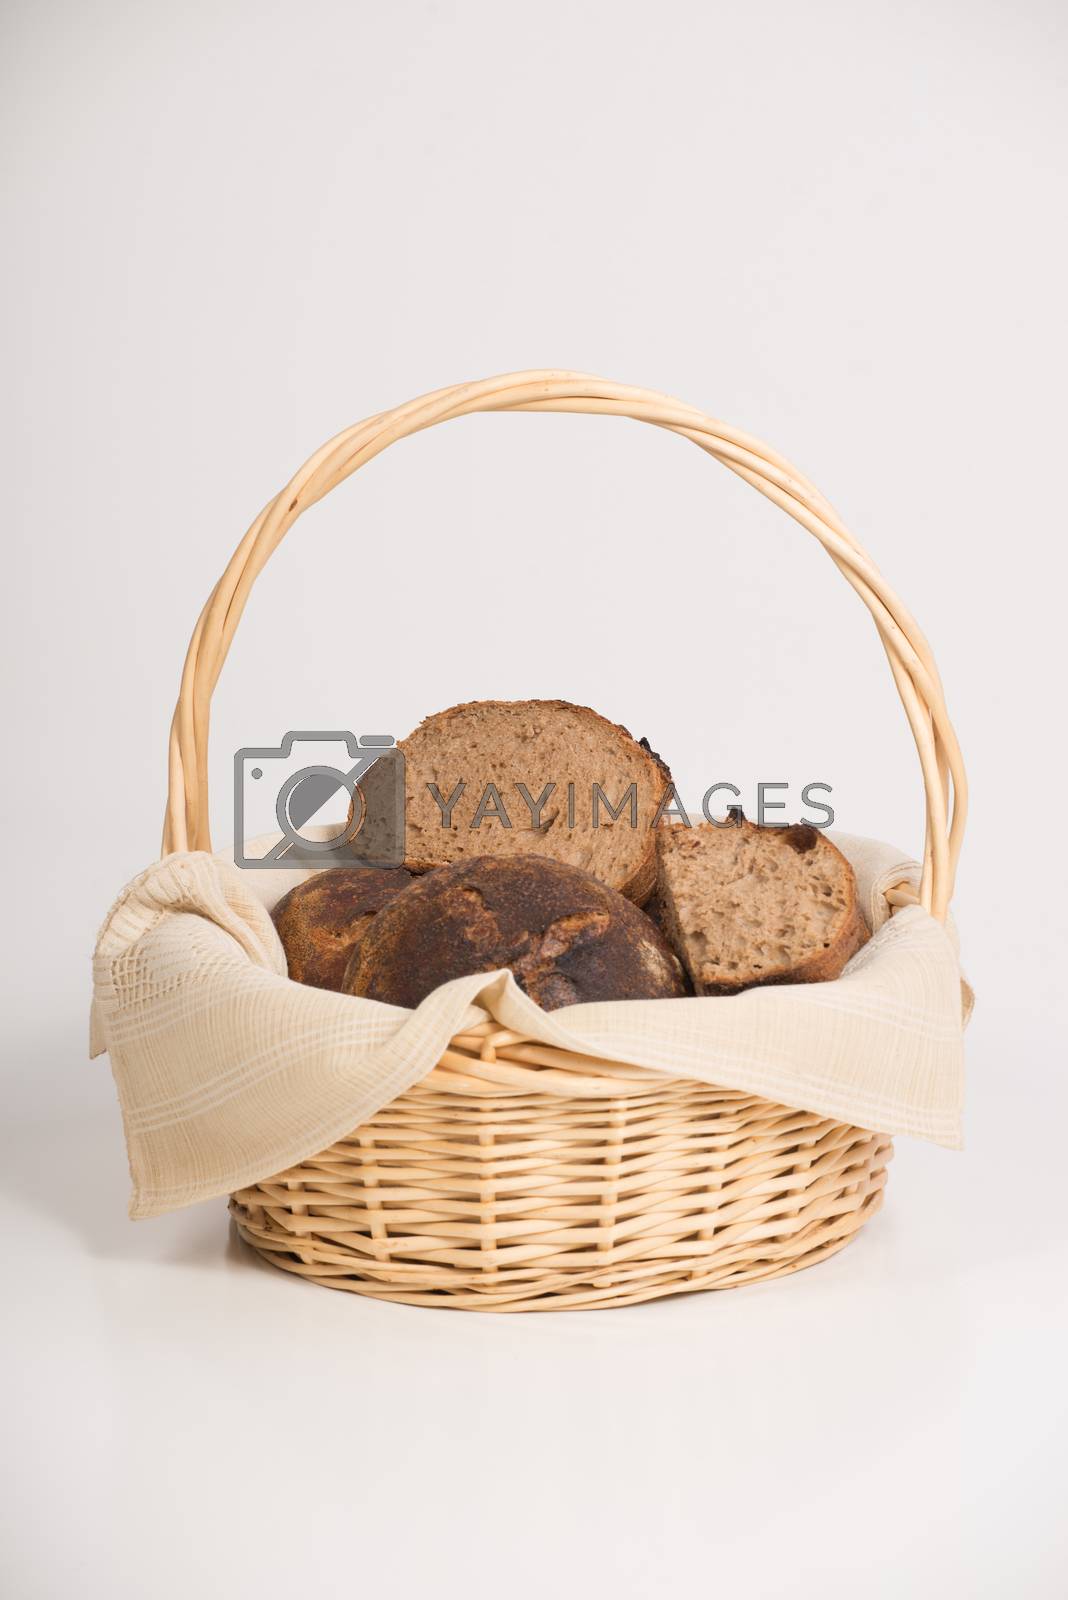 Royalty free image of Whole wheat bread by viscorp